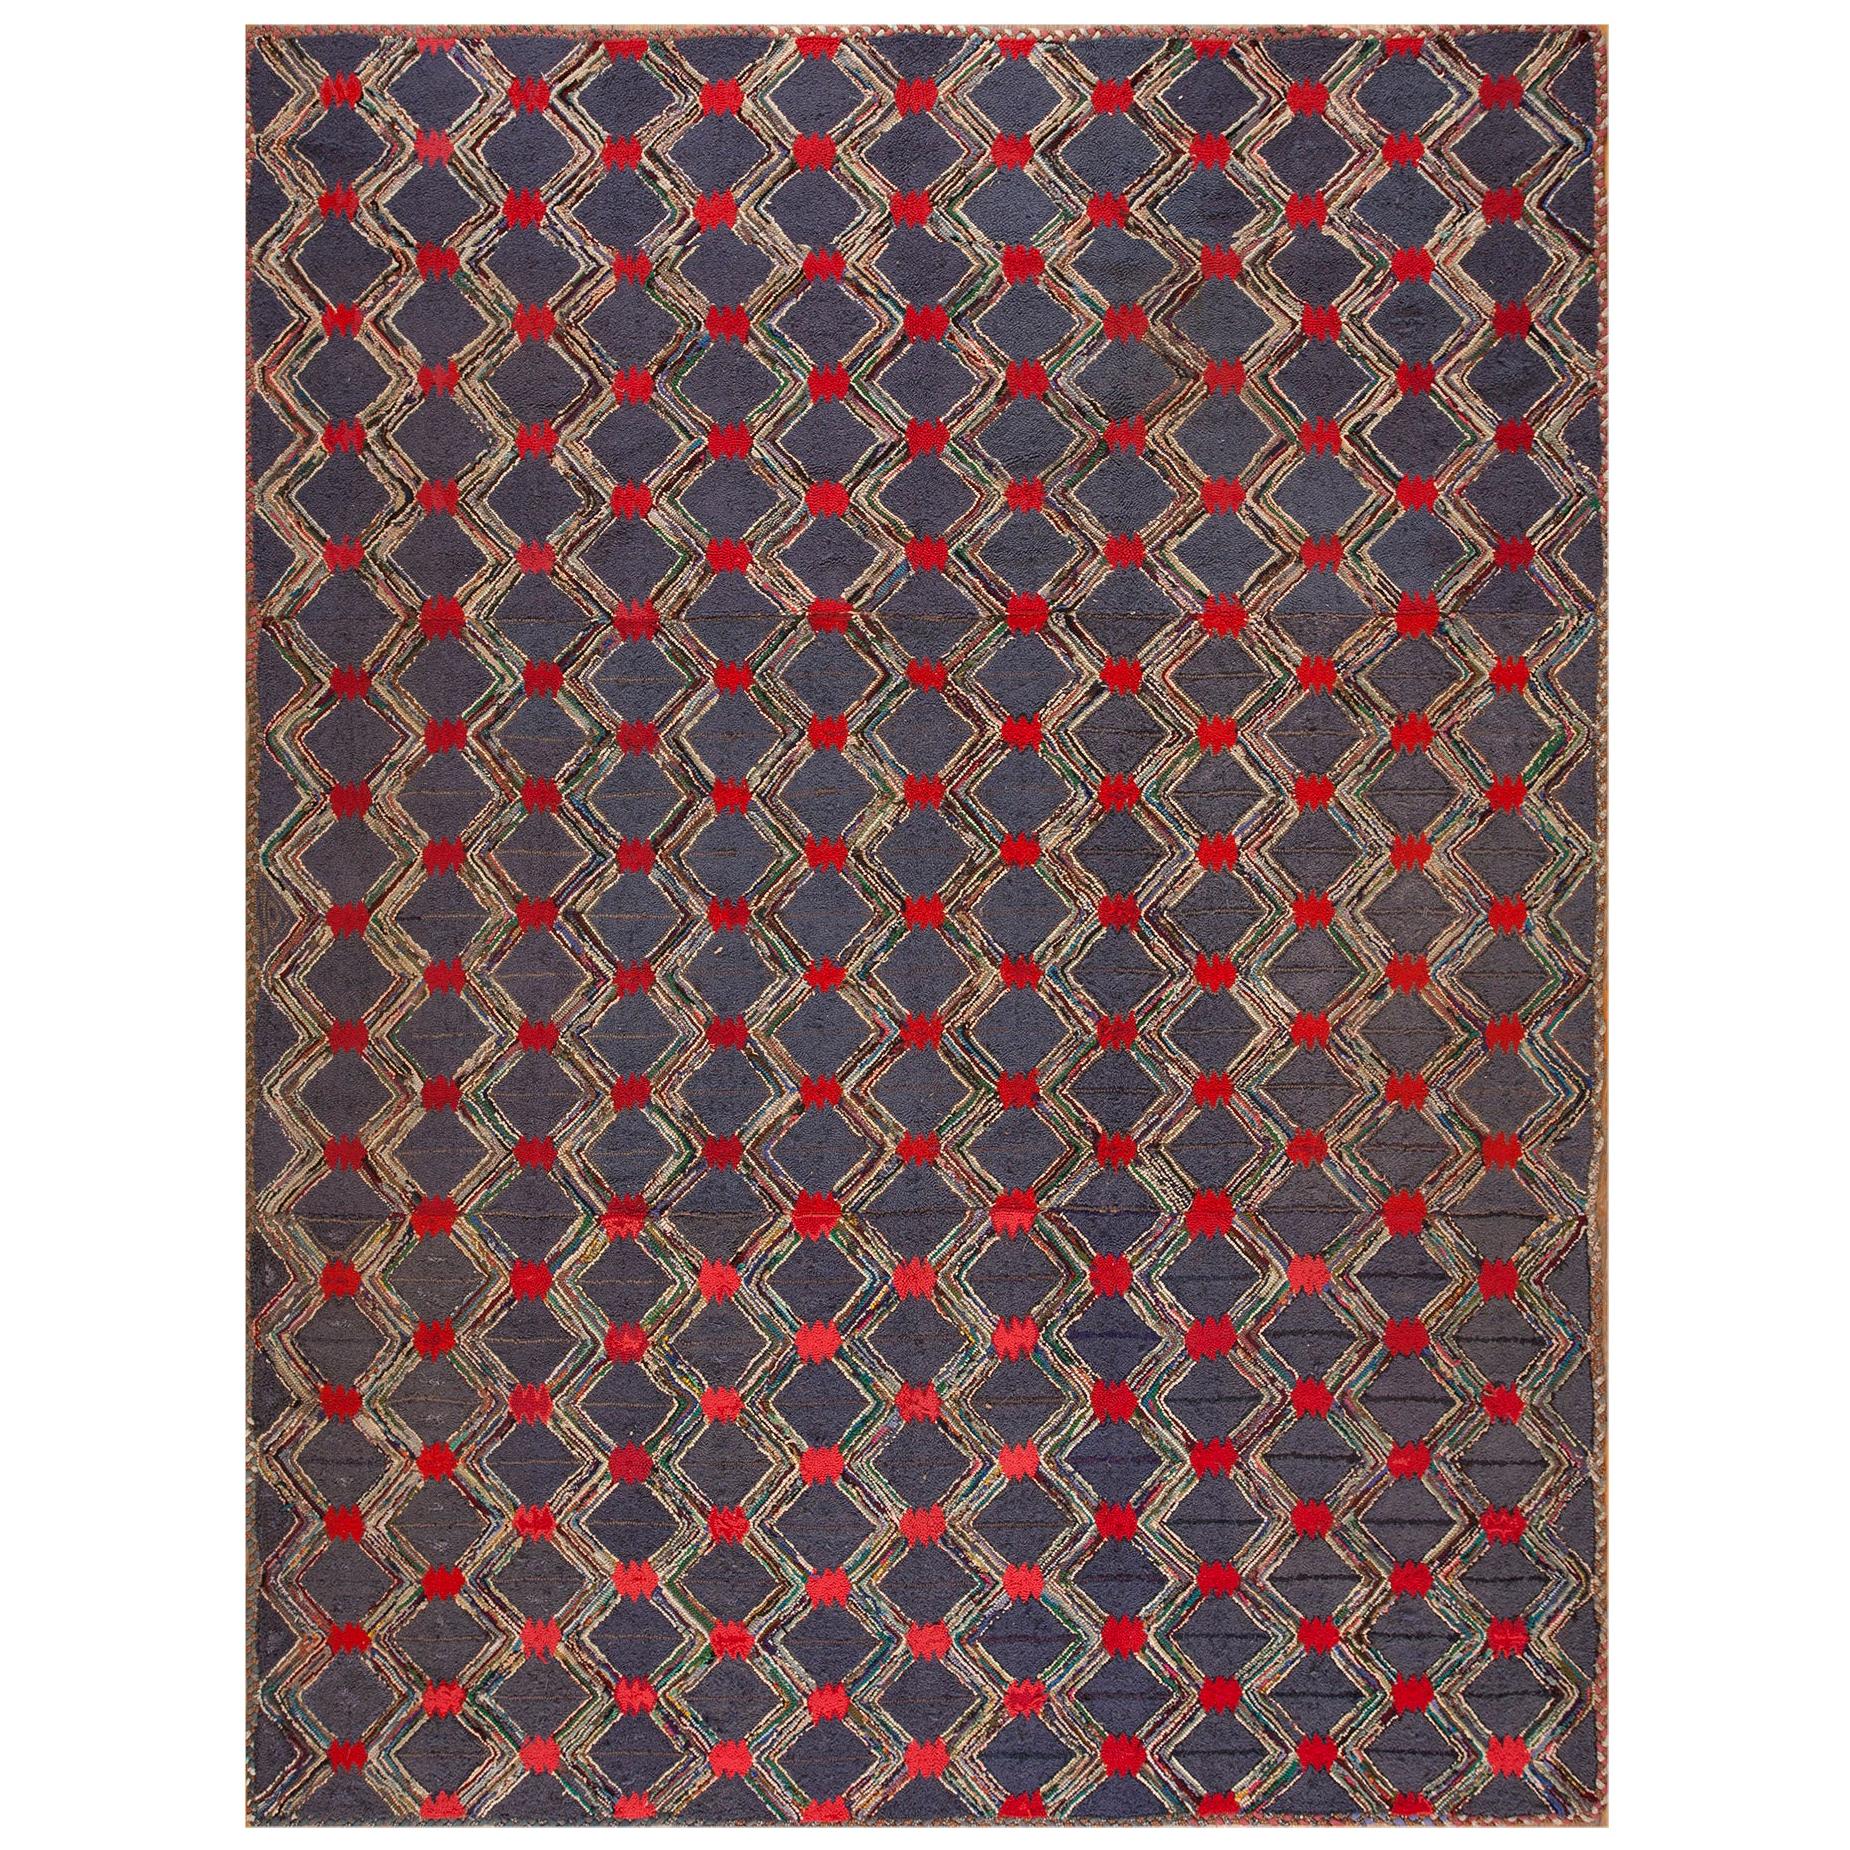 Mid 20th Century American Hooked Rug ( 8'6" x 11'6" - 260 x 350 ) For Sale